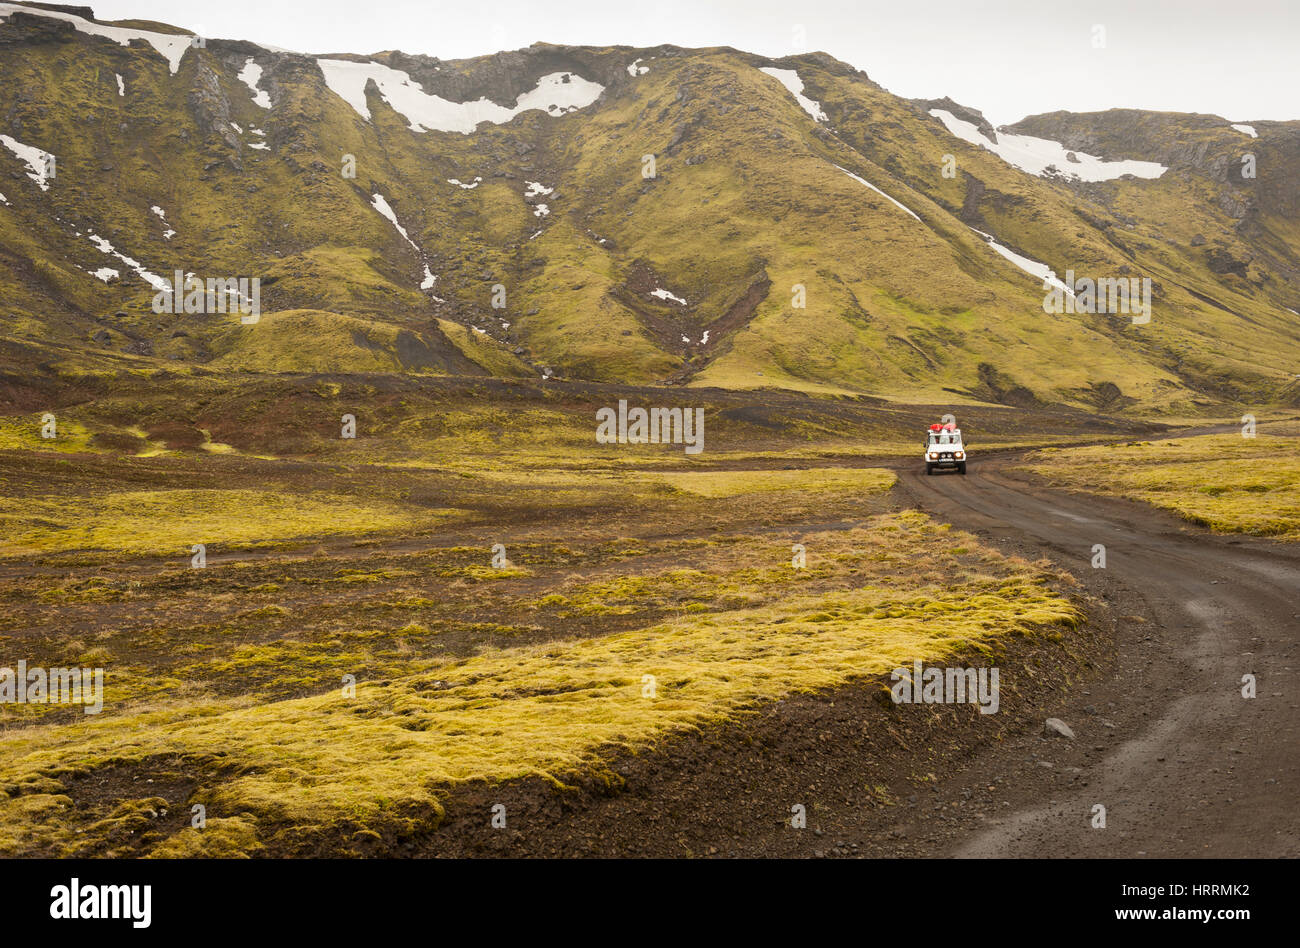 A Land Rover 4x4 off-road vehicle driving along an unpaved road at Laki Craters National Park in Iceland. Stock Photo